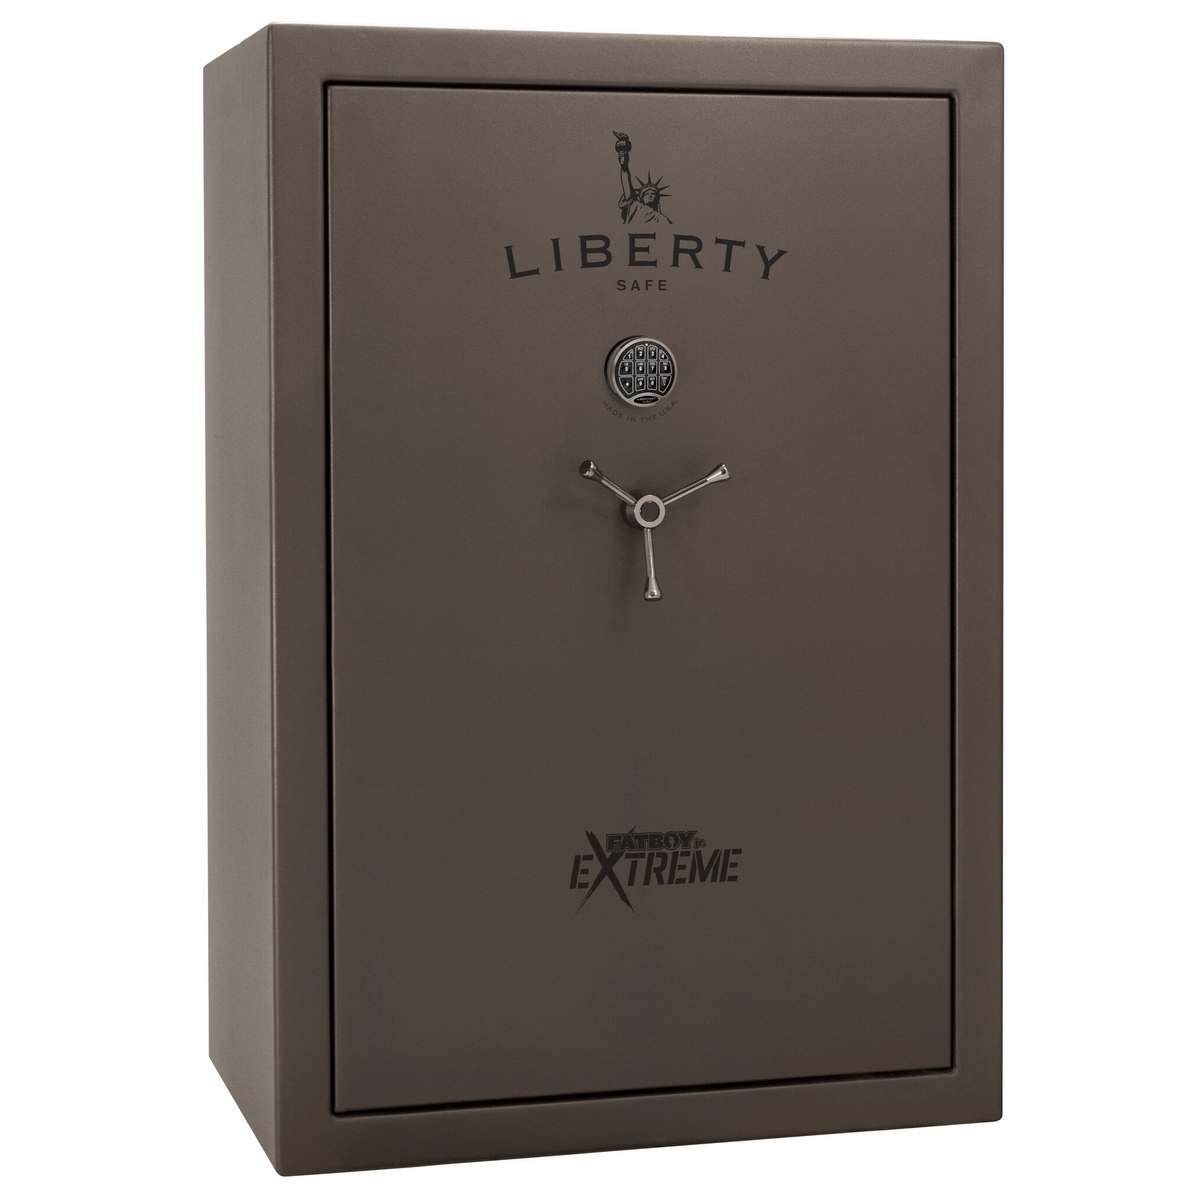 Fatboy Jr. Extreme | Bronze | Level 4 Security | 75 Minute Fire Protection | Liberty Safe Norcal.